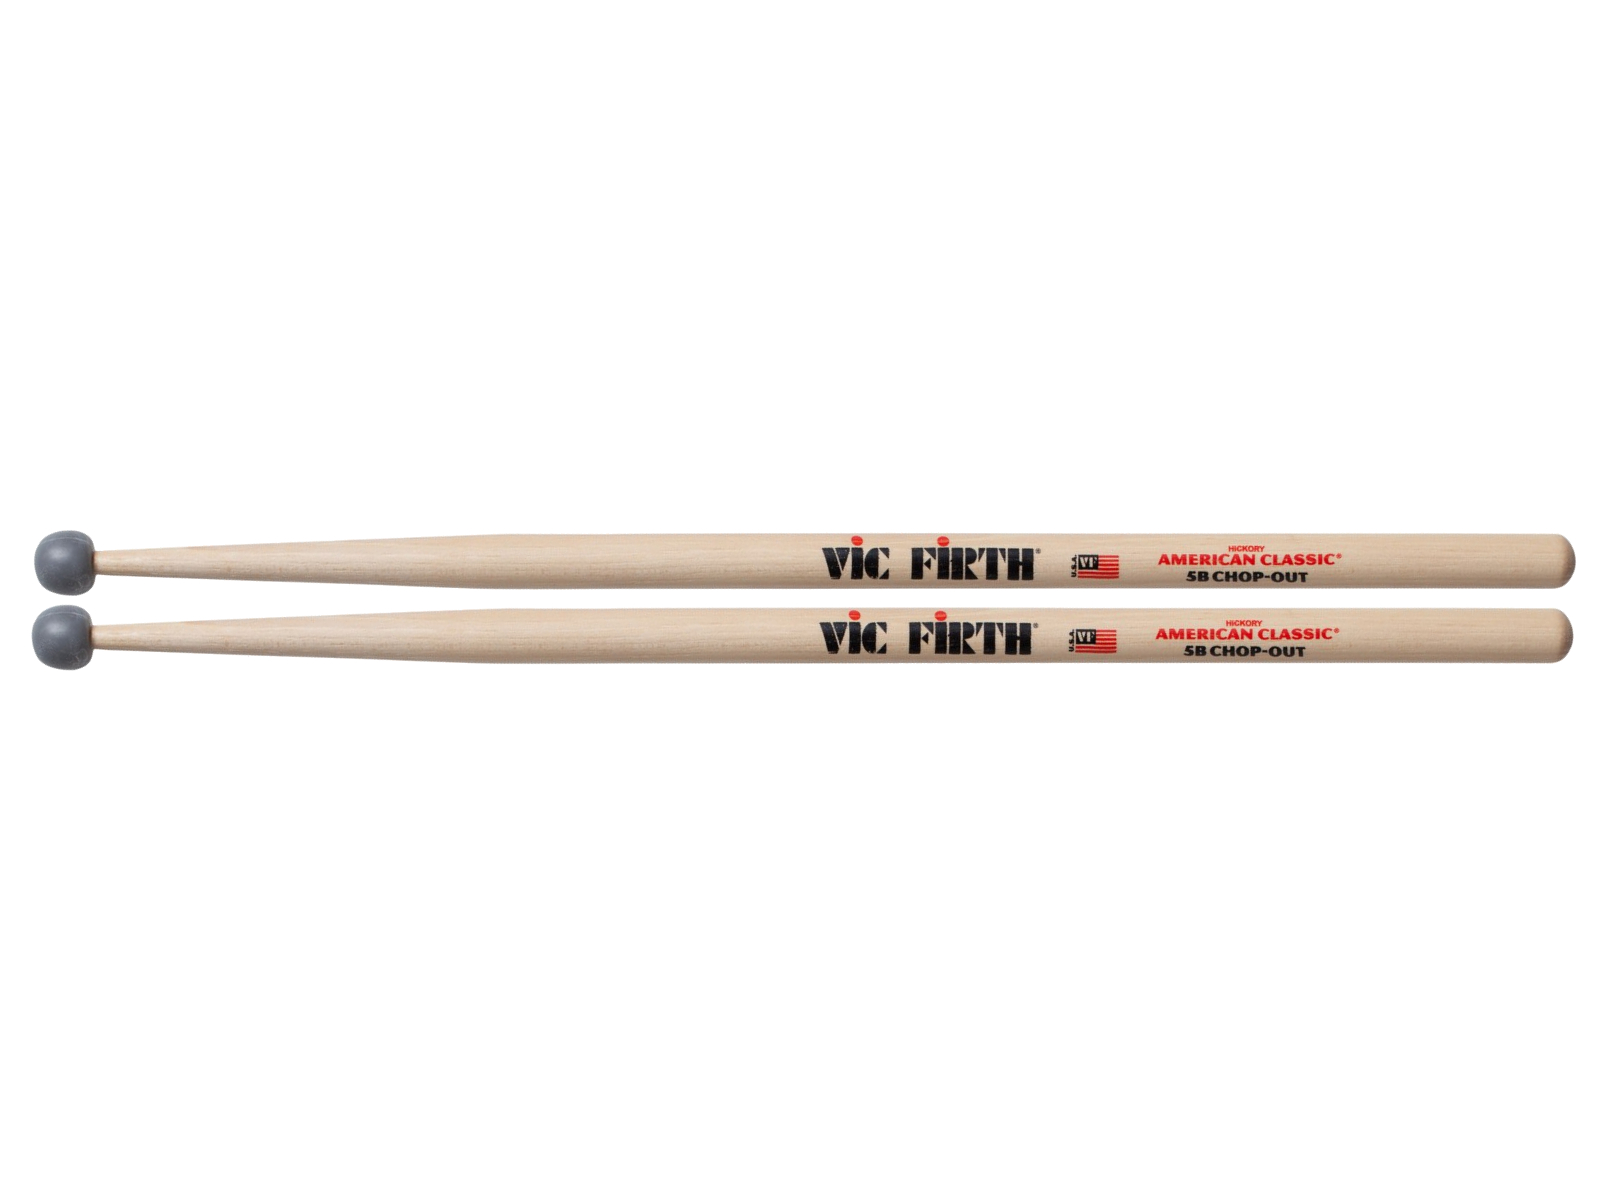 VIC FIRTH 5B CHOP-OUT PRACTICE STICKS